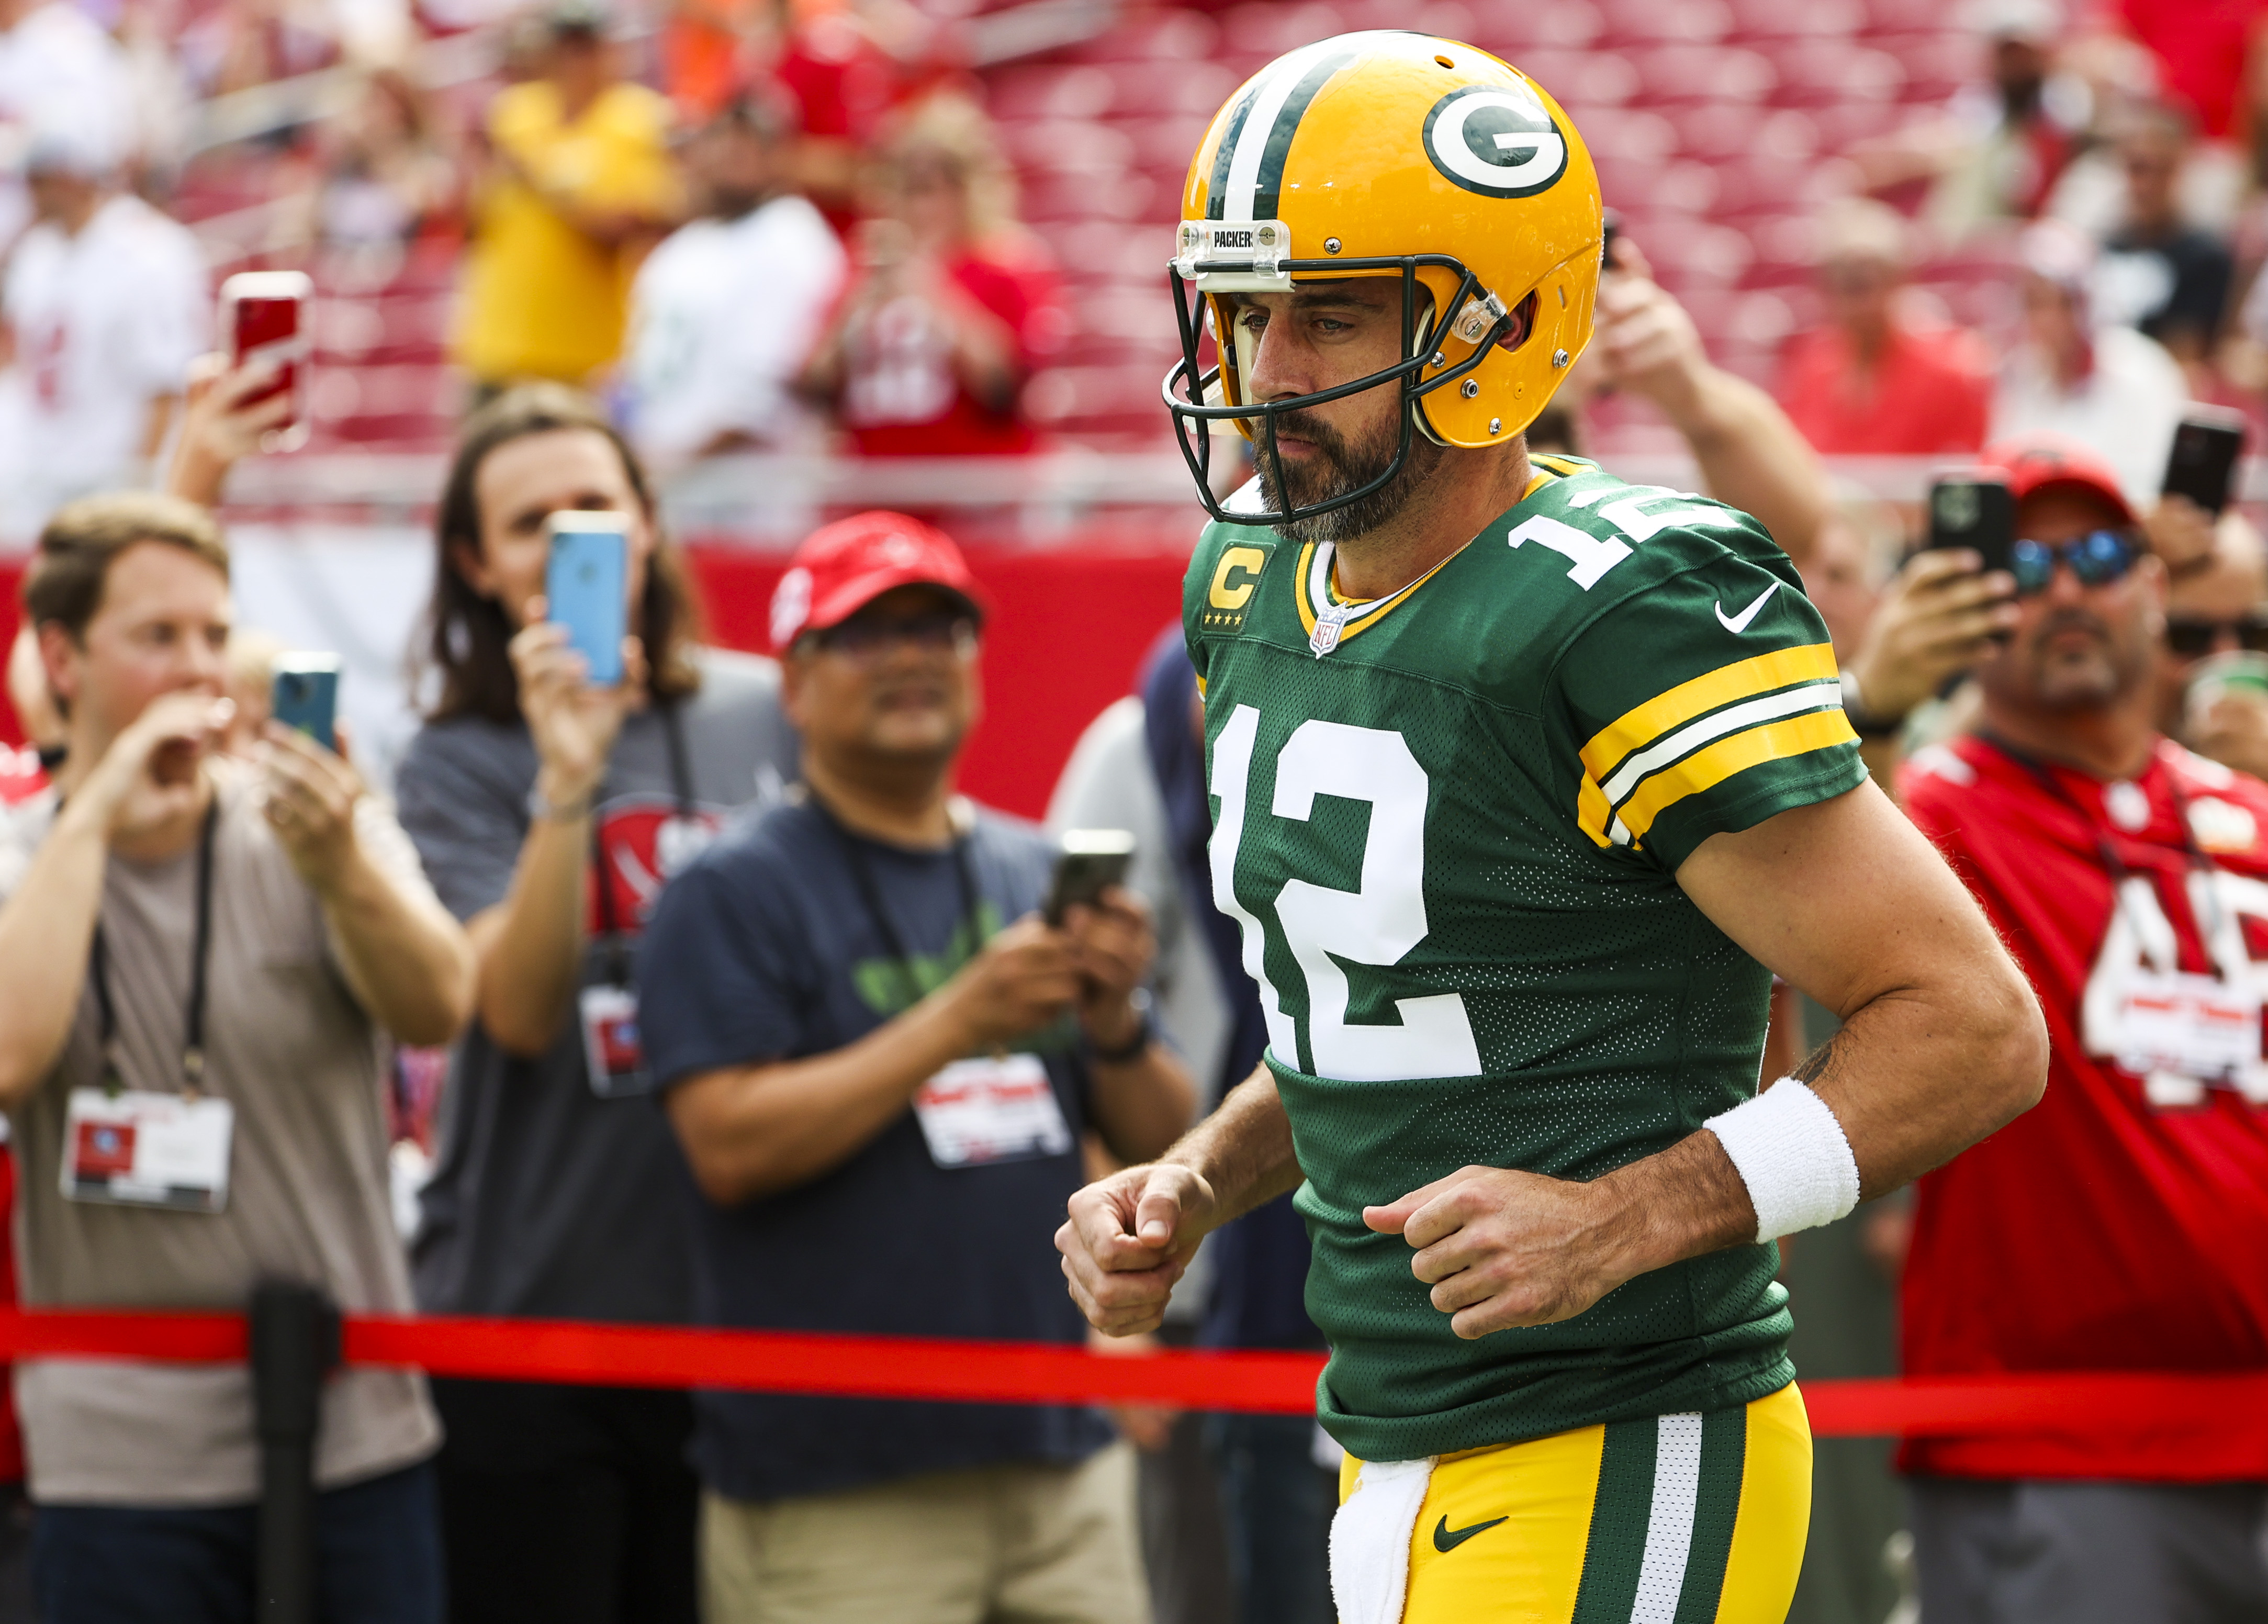 Buccaneers vs Packers: Tampa Bay's offensive woes continue in tight 14-12  loss to Green Bay